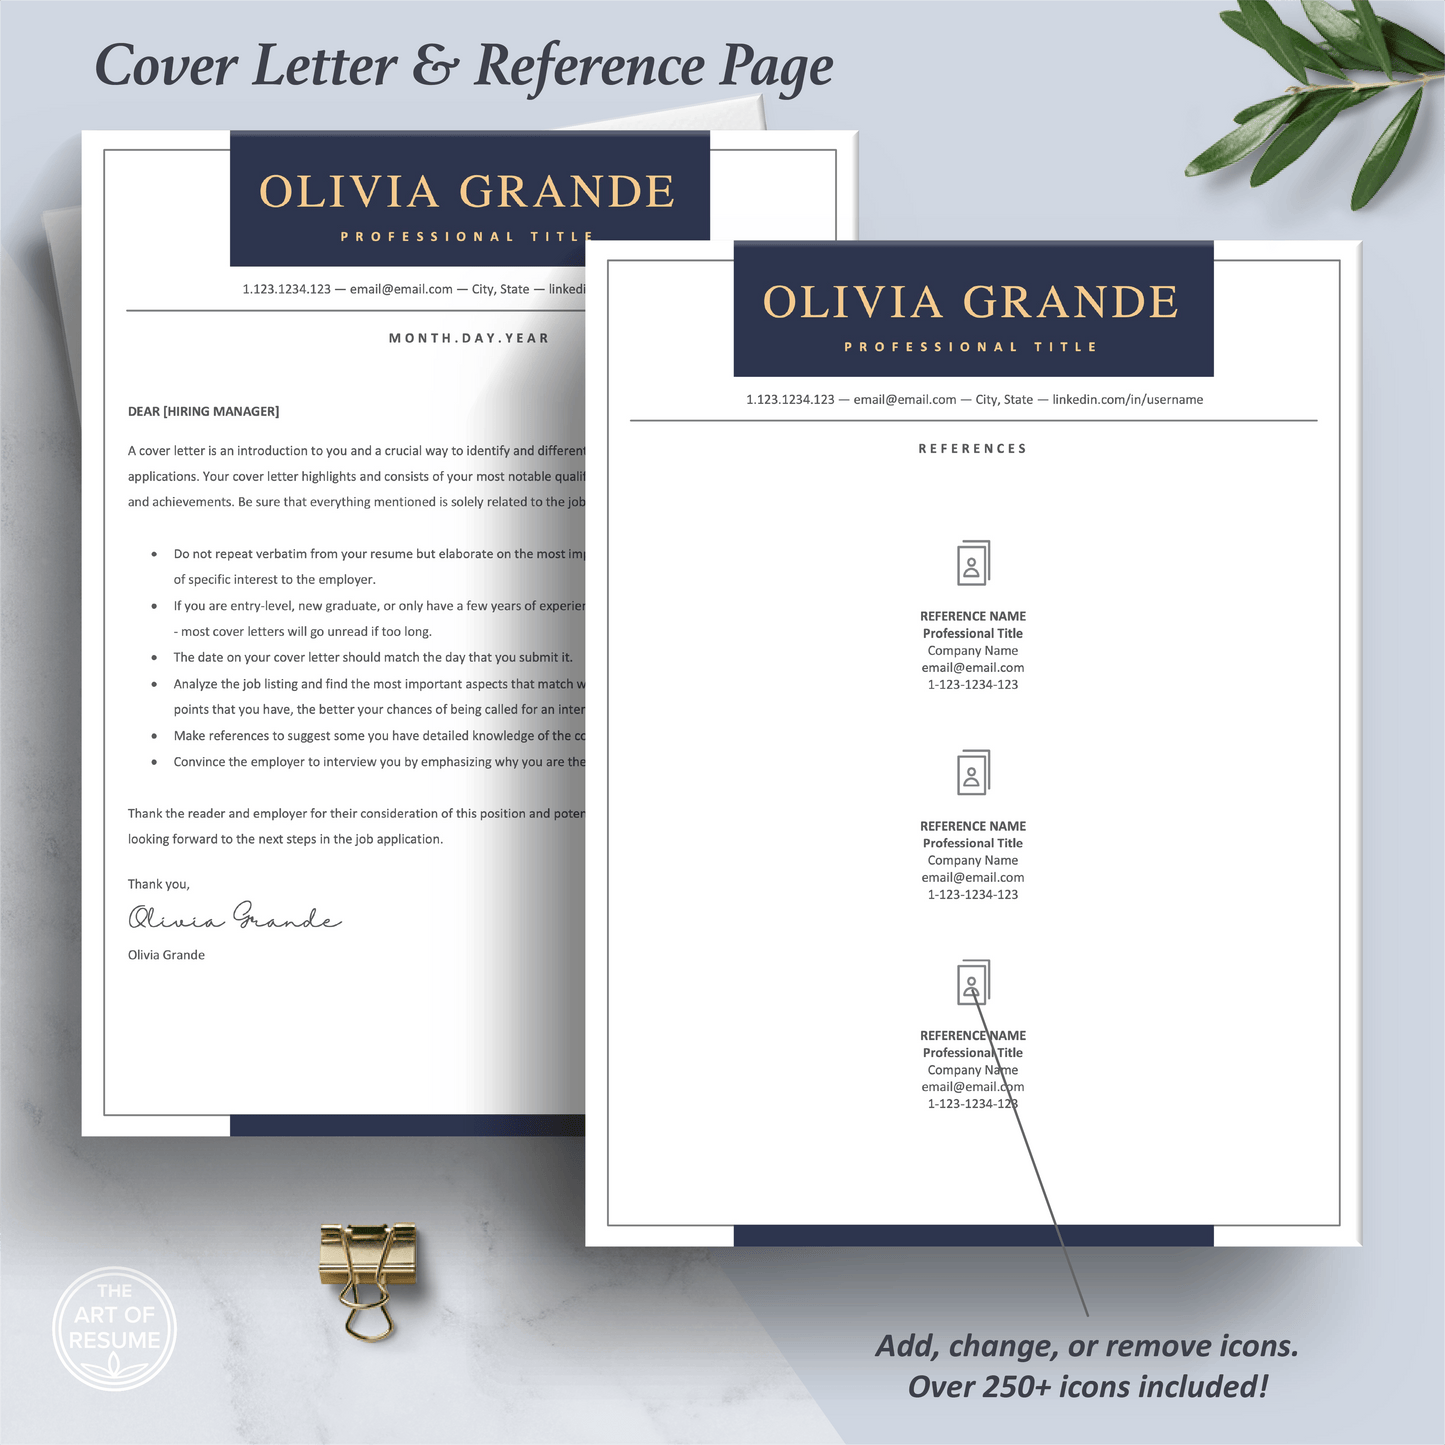 The Art of Resume Templates | Professional Navy Cover Letter and Reference Page Templates Download